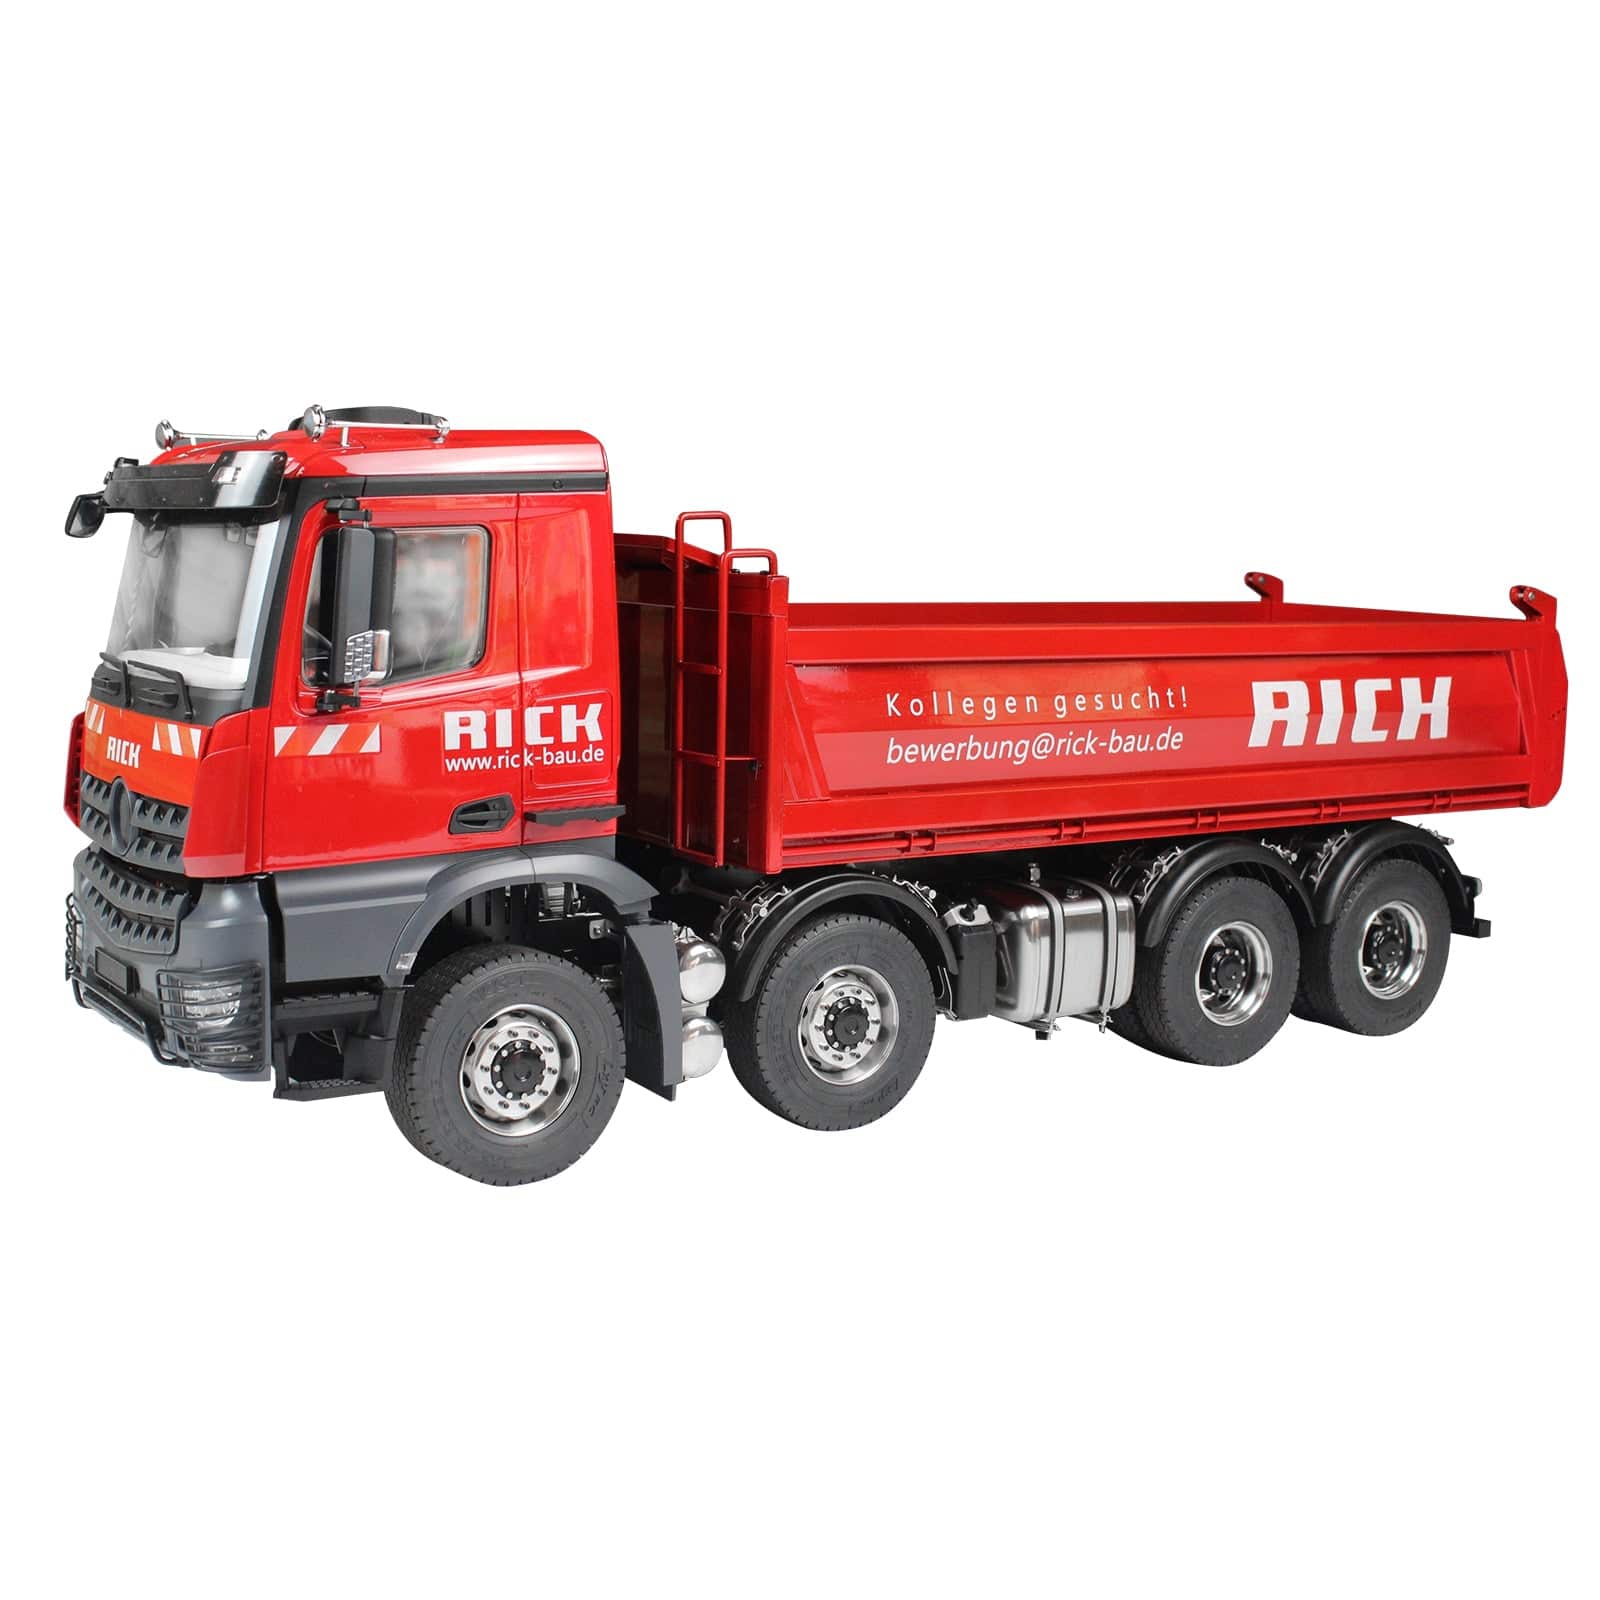 http://www.stirlingkit.com/cdn/shop/products/stirlingkit-lxy-rc-1-14-rc-truck-hydraulic-8-8-dump-transport-truck-with-3-speed-gear-box_9_894afe85-eec8-4c2a-b91a-100532db398b.jpg?v=1659542499